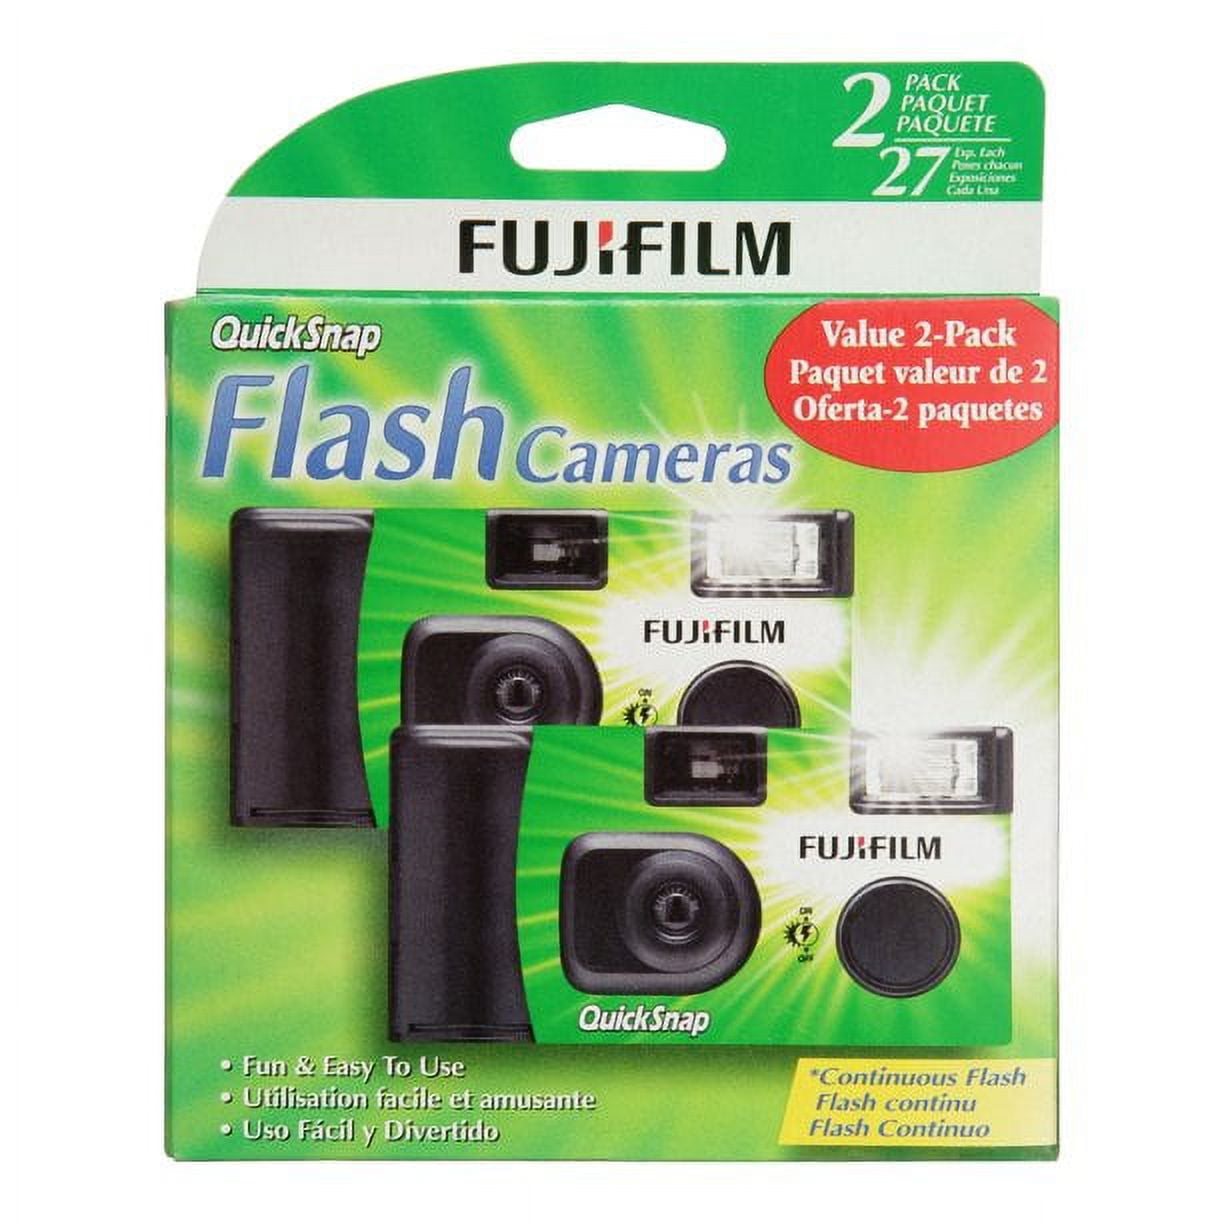 2023 New Disposable Camera 35 Mm Vintage Camera With Flash Single Use Di